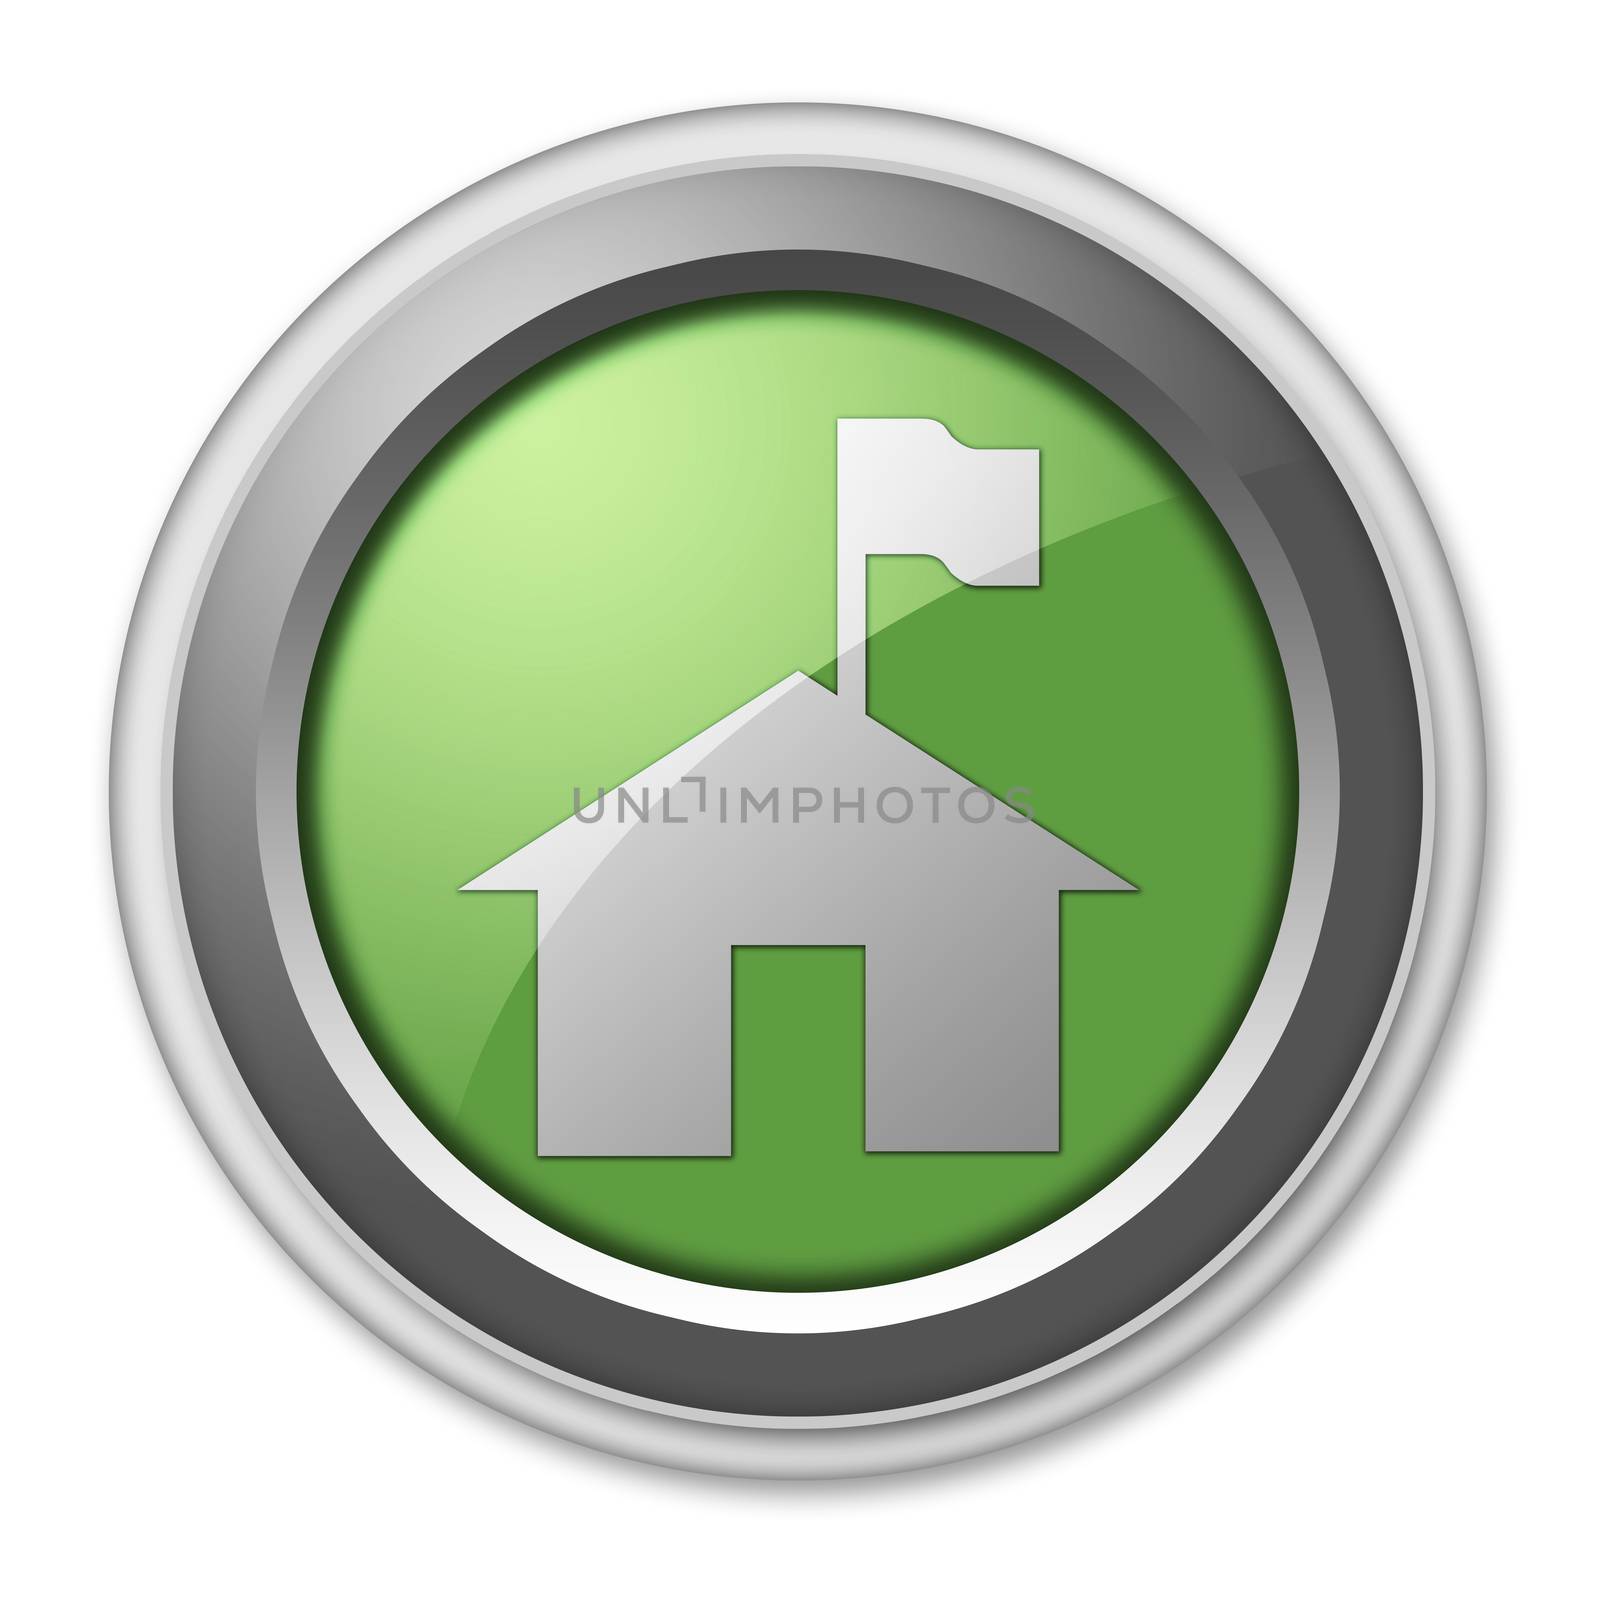 Icon, Button, Pictogram with Ranger Station symbol